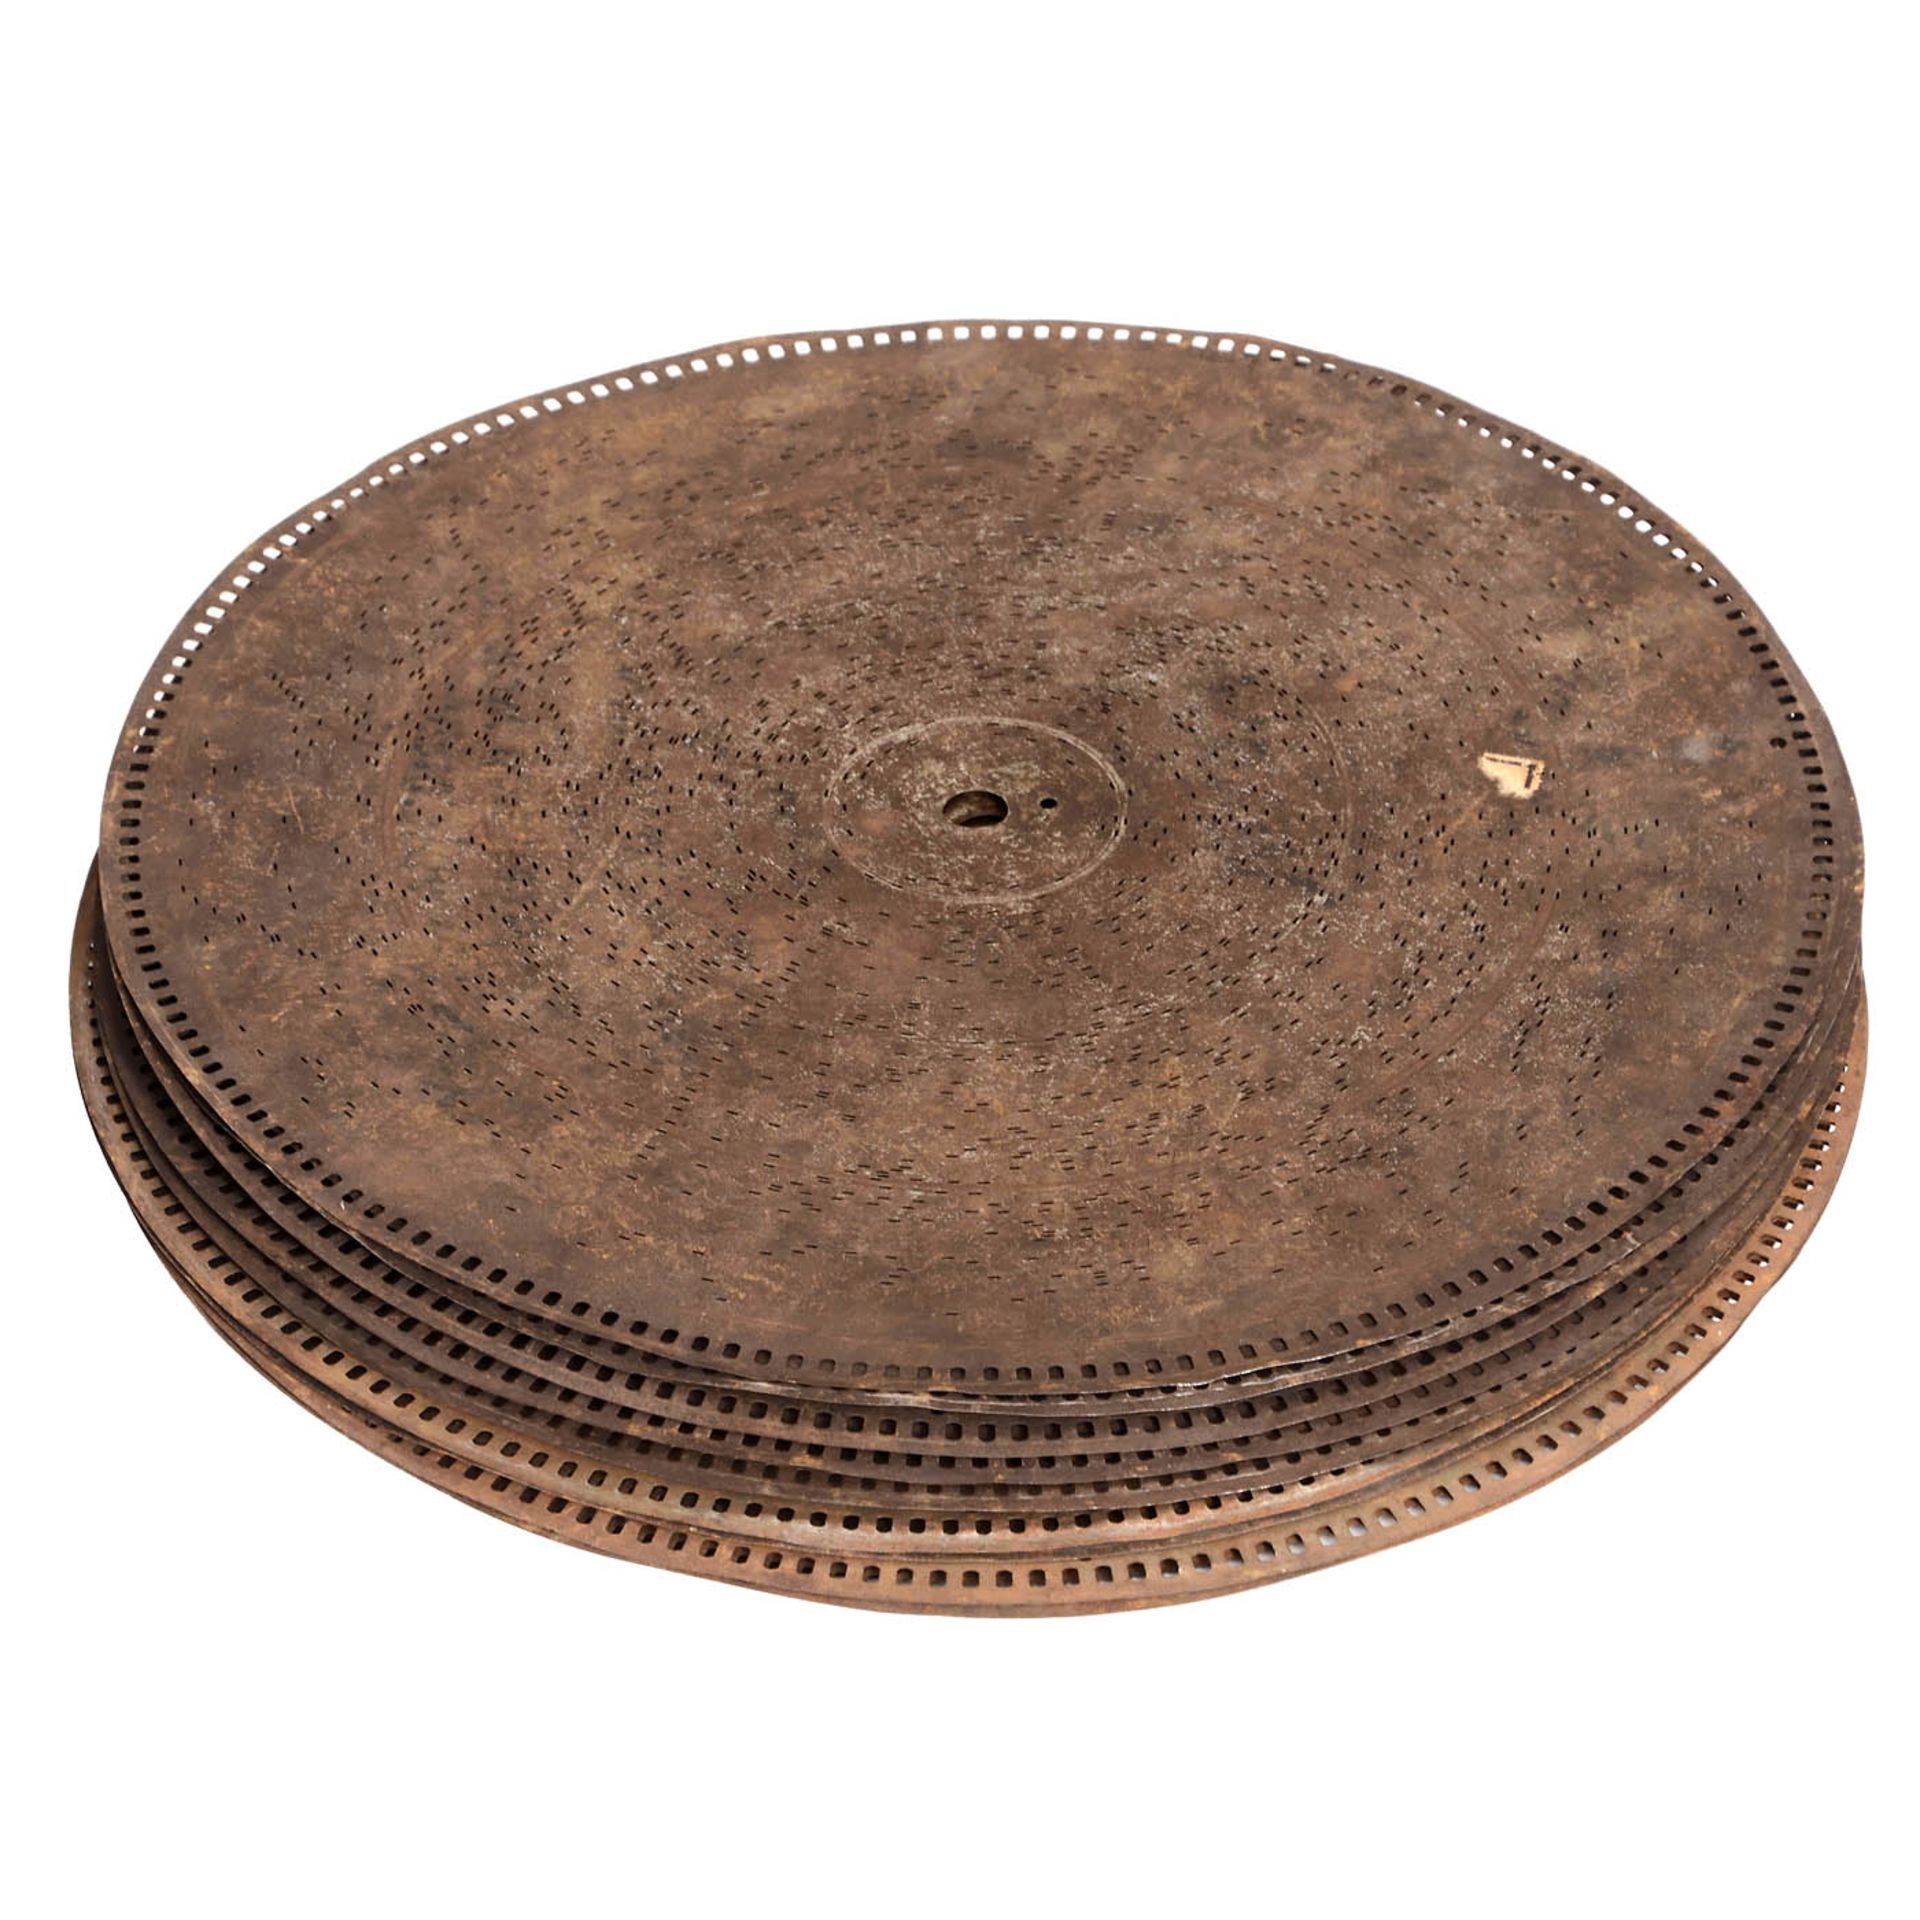 Imperator Model 48 Coin-Operated Disc Musical Box, c. 1895 - Image 3 of 3